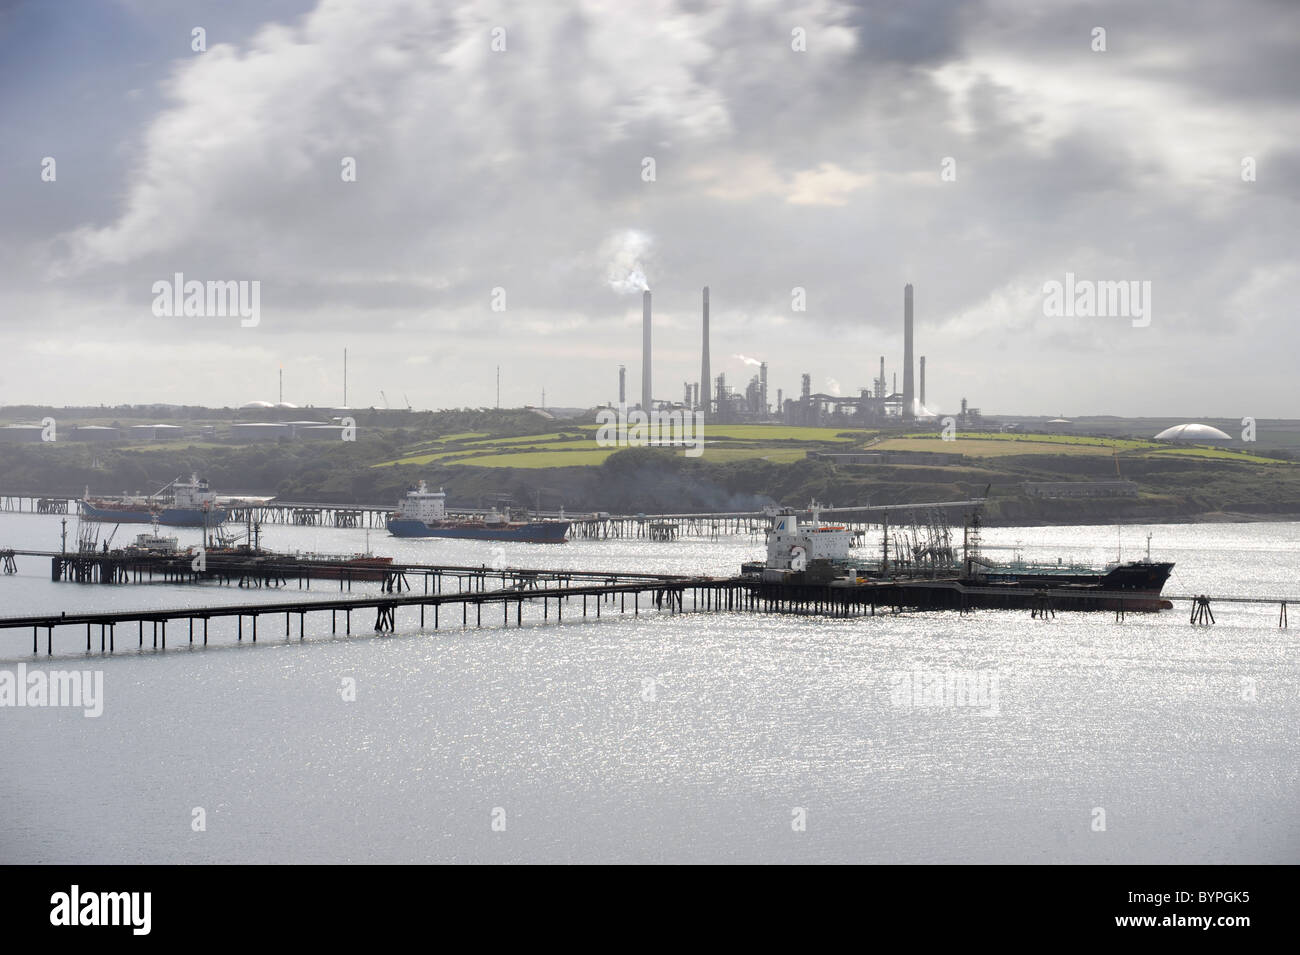 View from Milford Haven across the bay to the oil refinery at Rhoscrowther, Wales UK Stock Photo